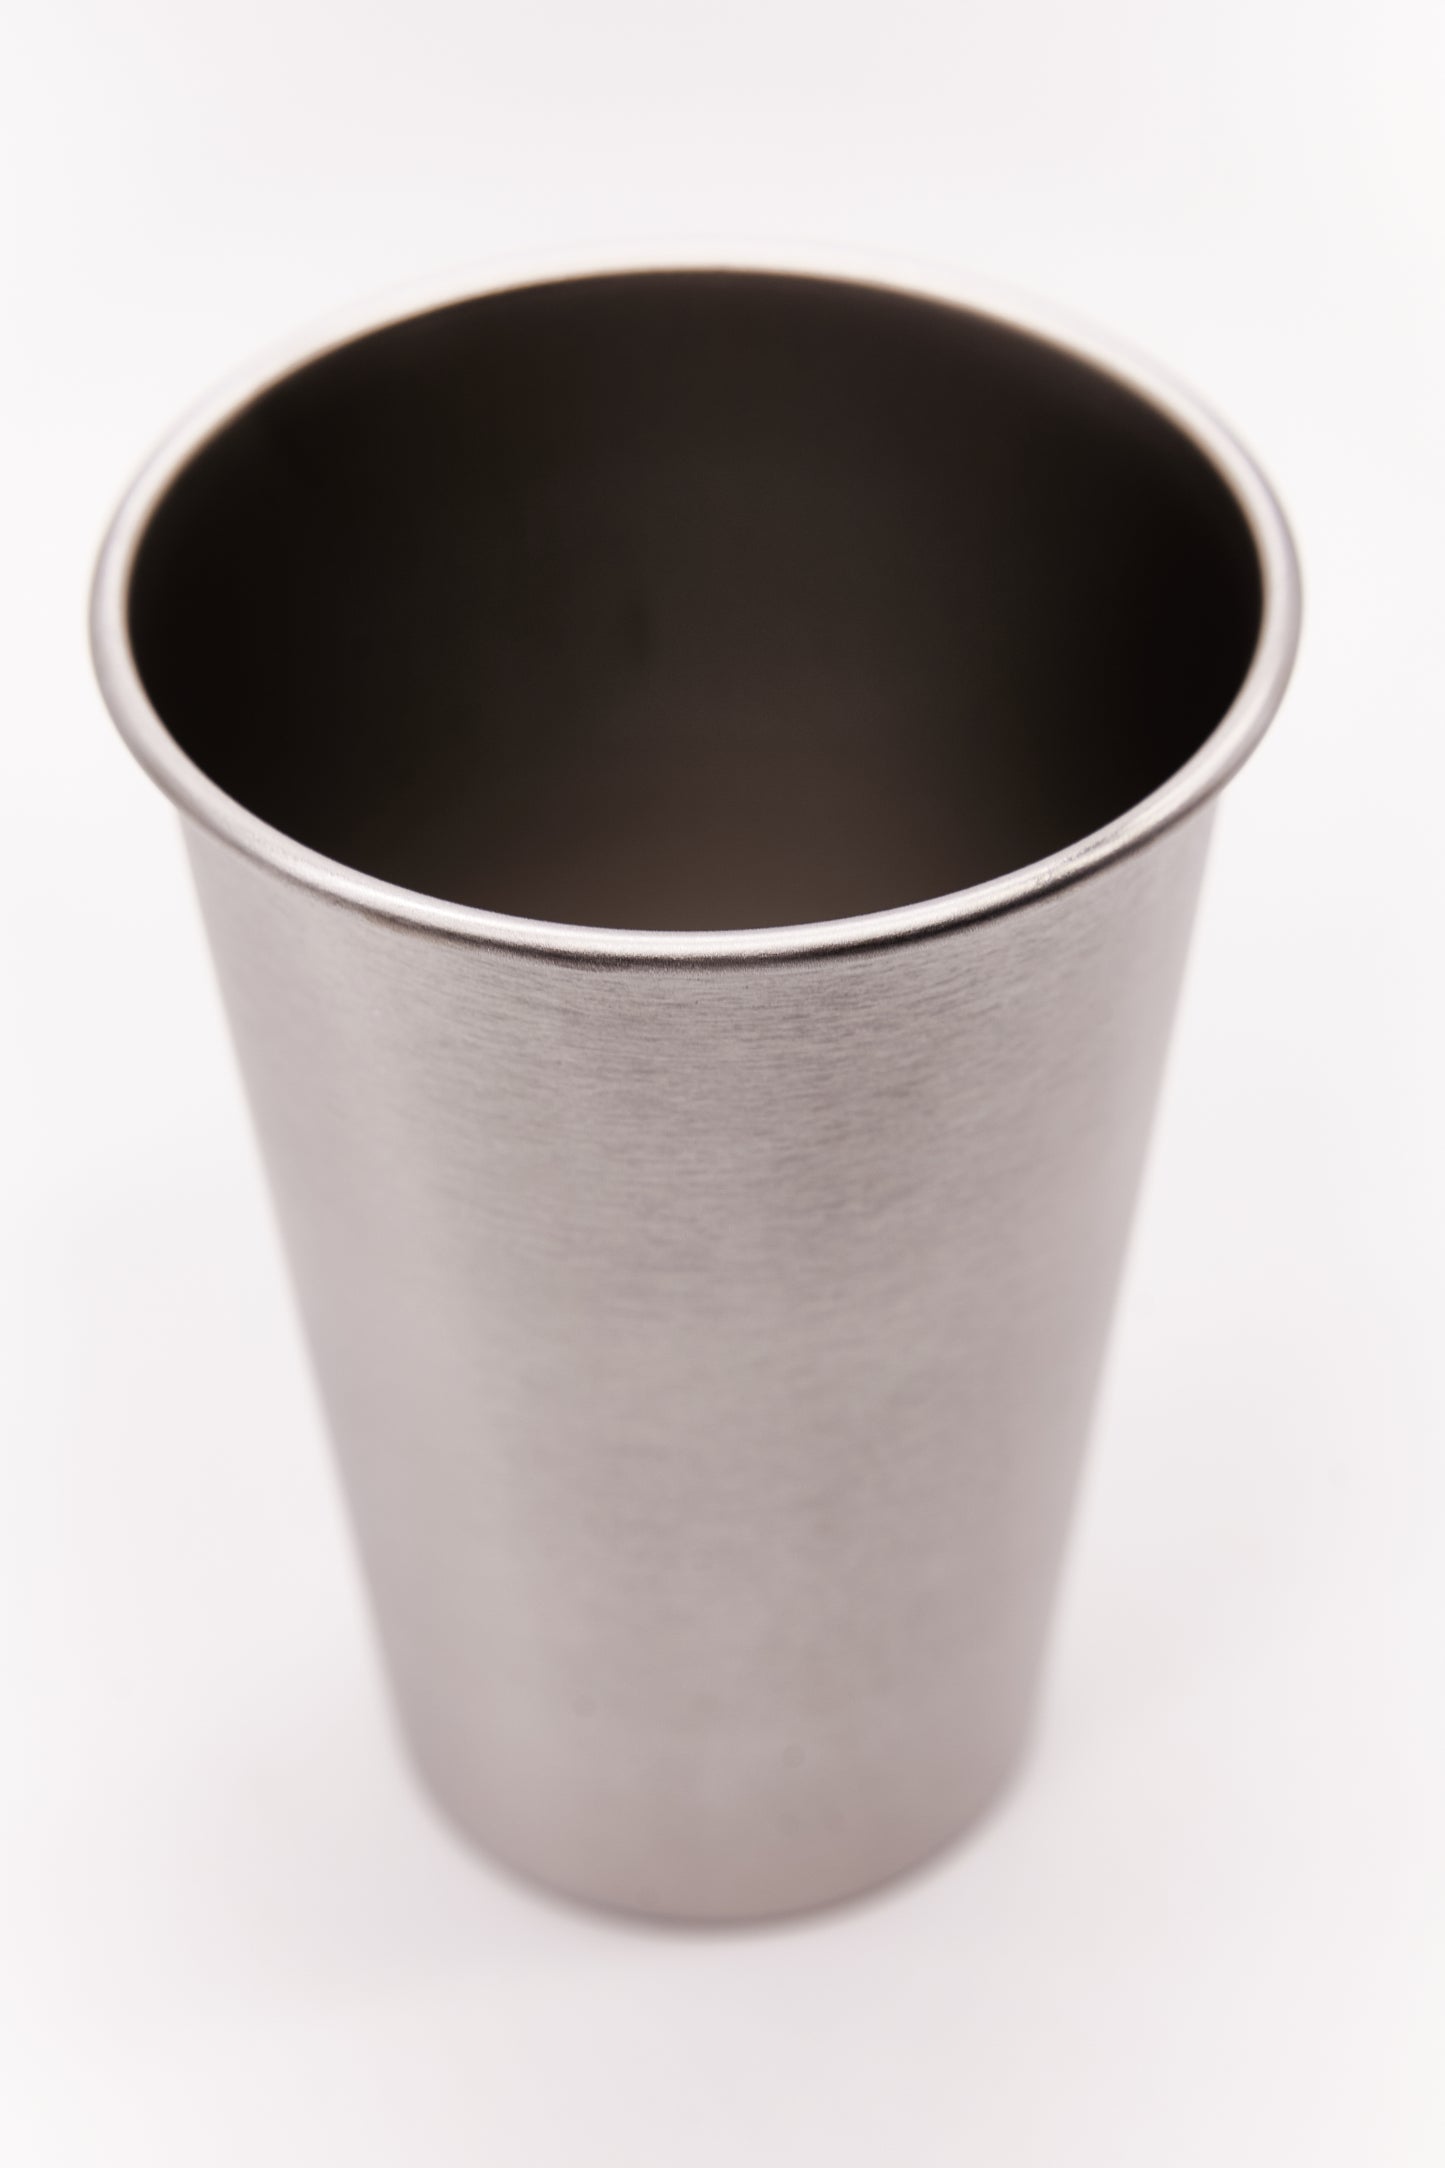 Stainless Steel Solo Cup